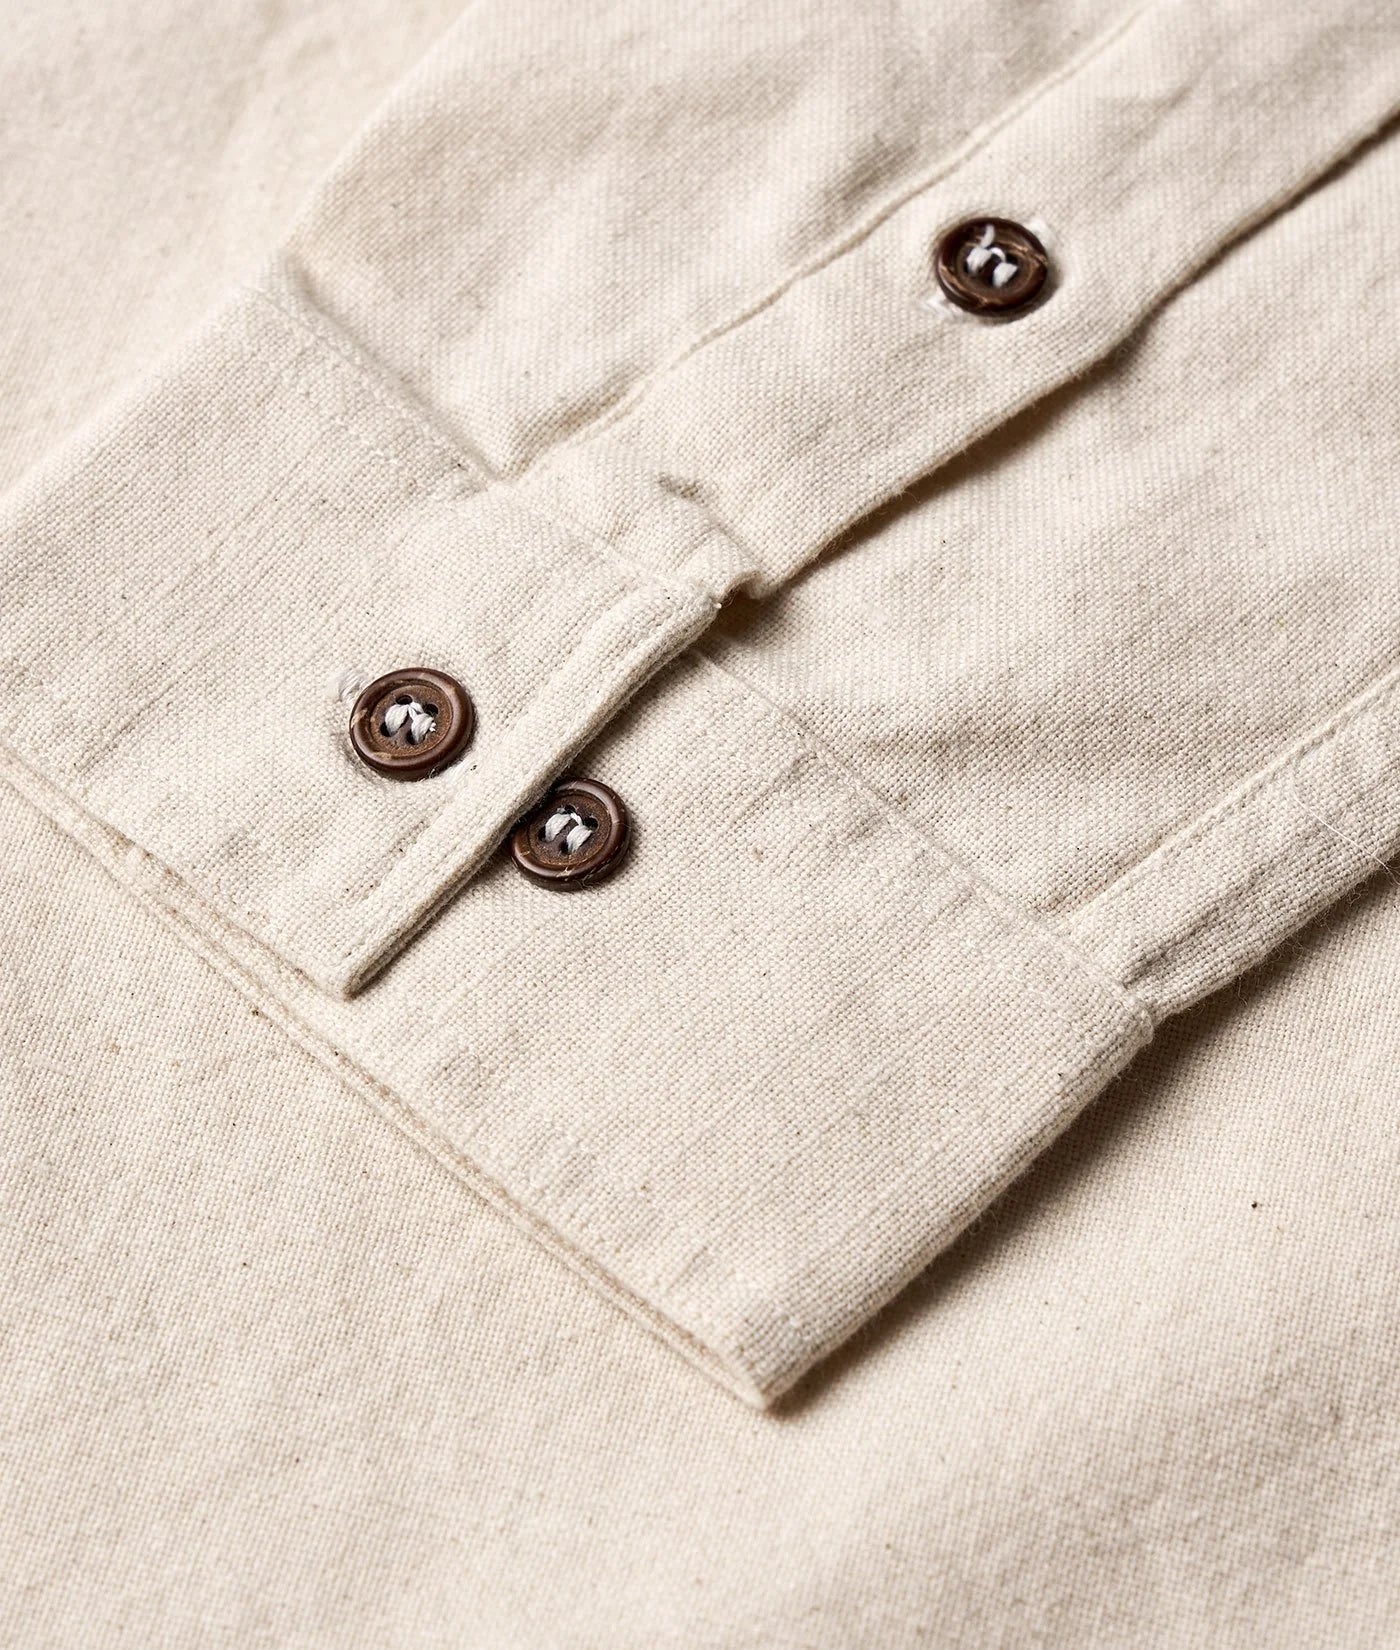 Industry of All Nations Pondi Shirt, Undyed